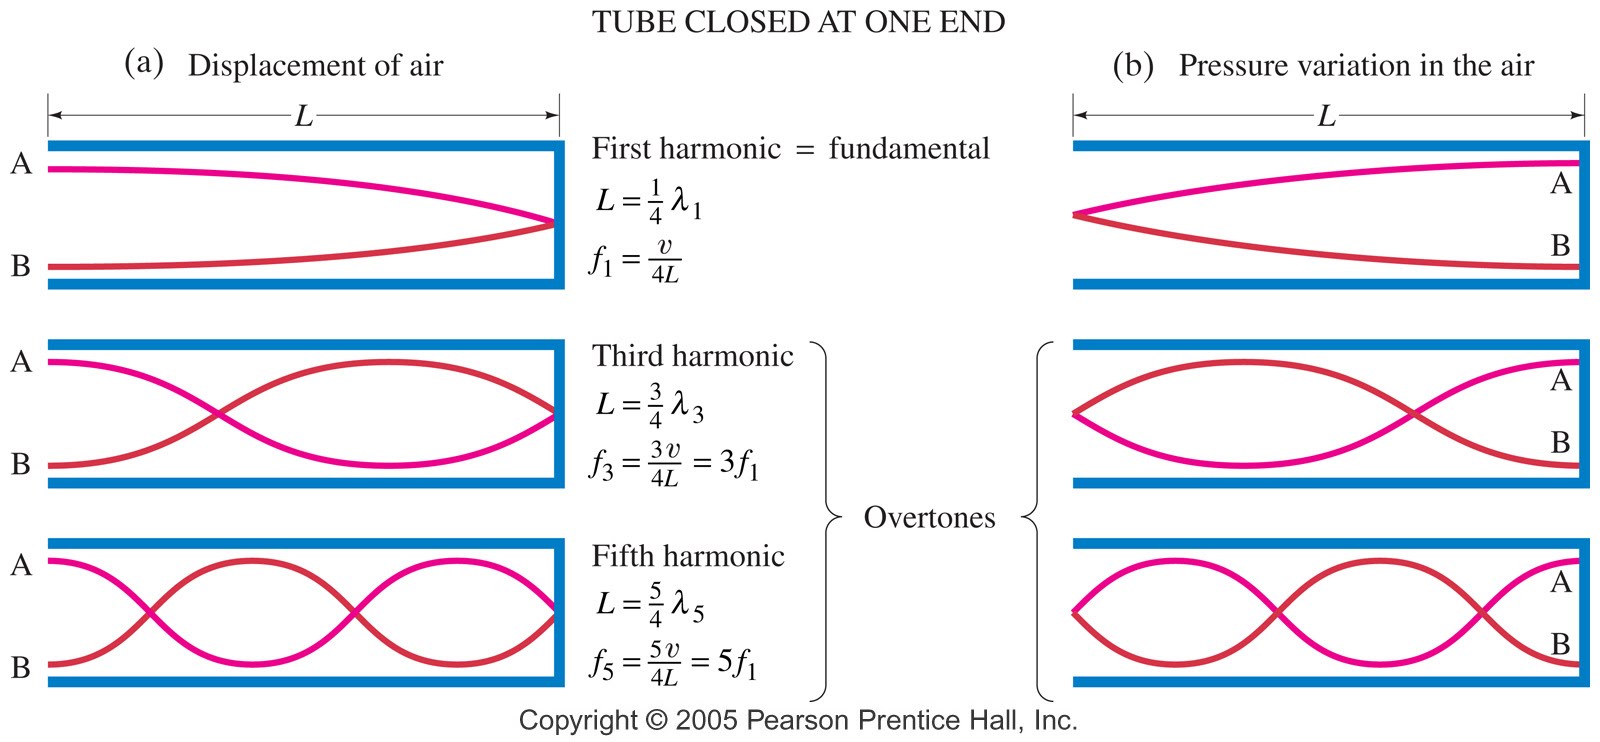 figure from Prentice Hall textbook showing the pressure and displacement plots for sound waves in an open-closed pipe